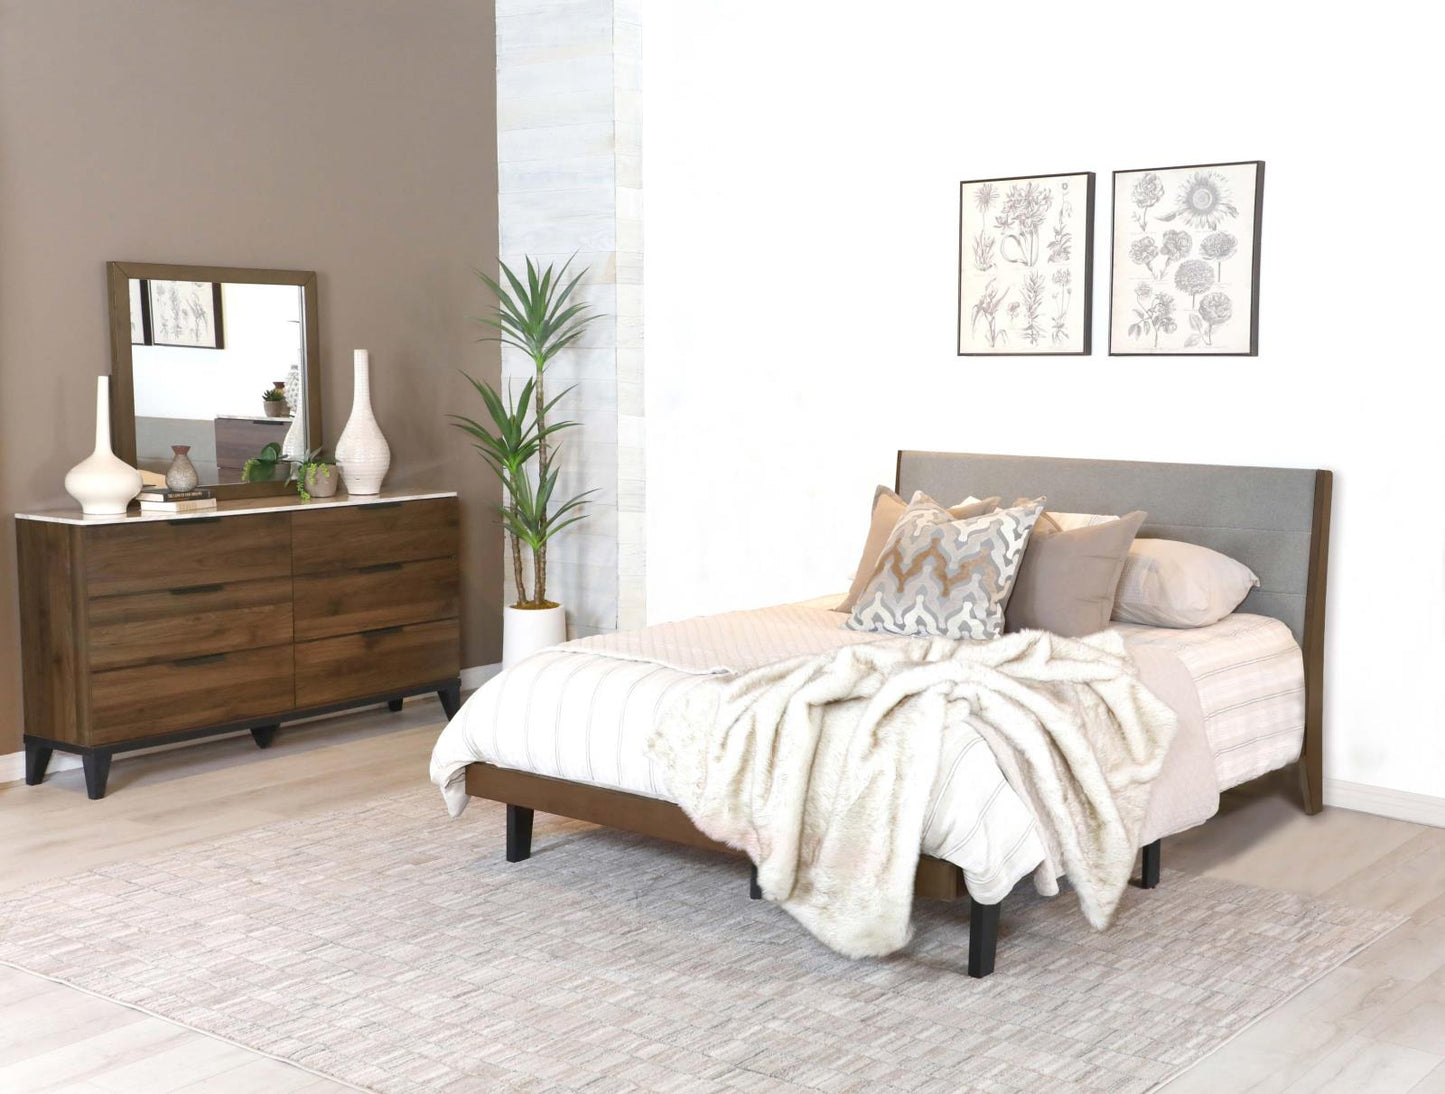 Mays 3-piece Upholstered Queen Bedroom Set Walnut Brown and Grey